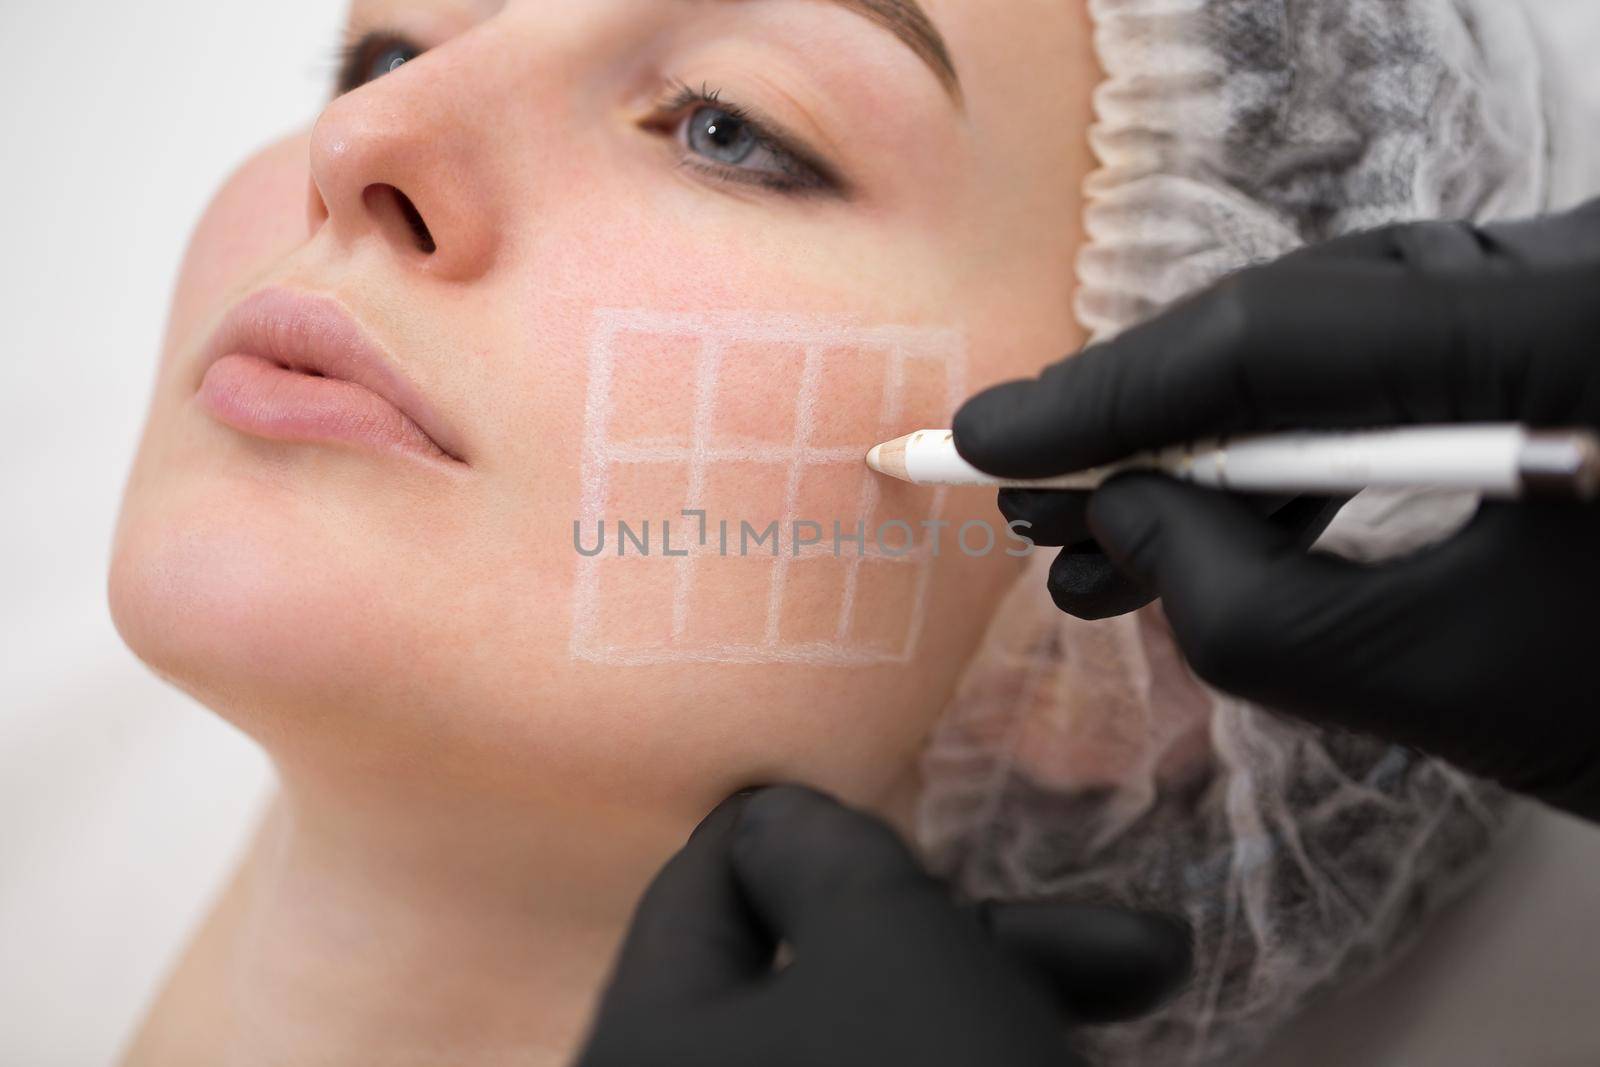 Beautician draws the contours of a white pencil on the face of the patient. Schematic marking before contouring. Close-up preparation of the face for cosmetic plastic surgery. by StudioPeace